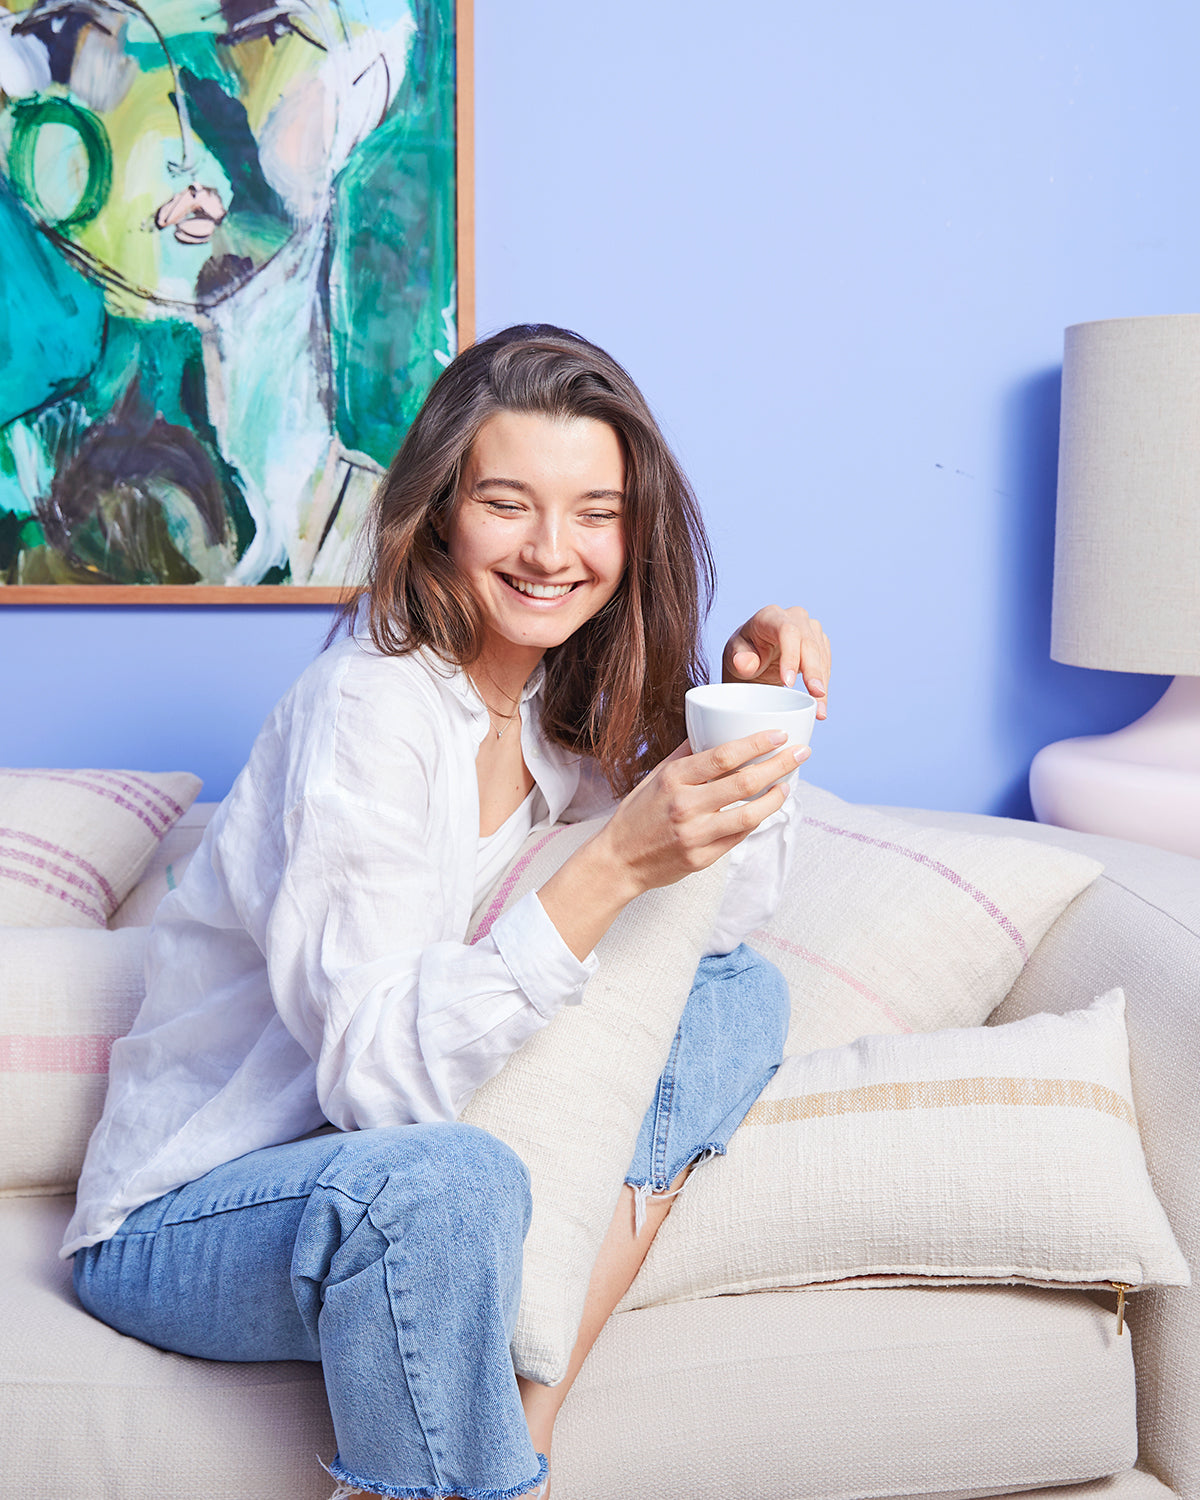 Woman laughing holding cup of coffee on a couch filled with pillows